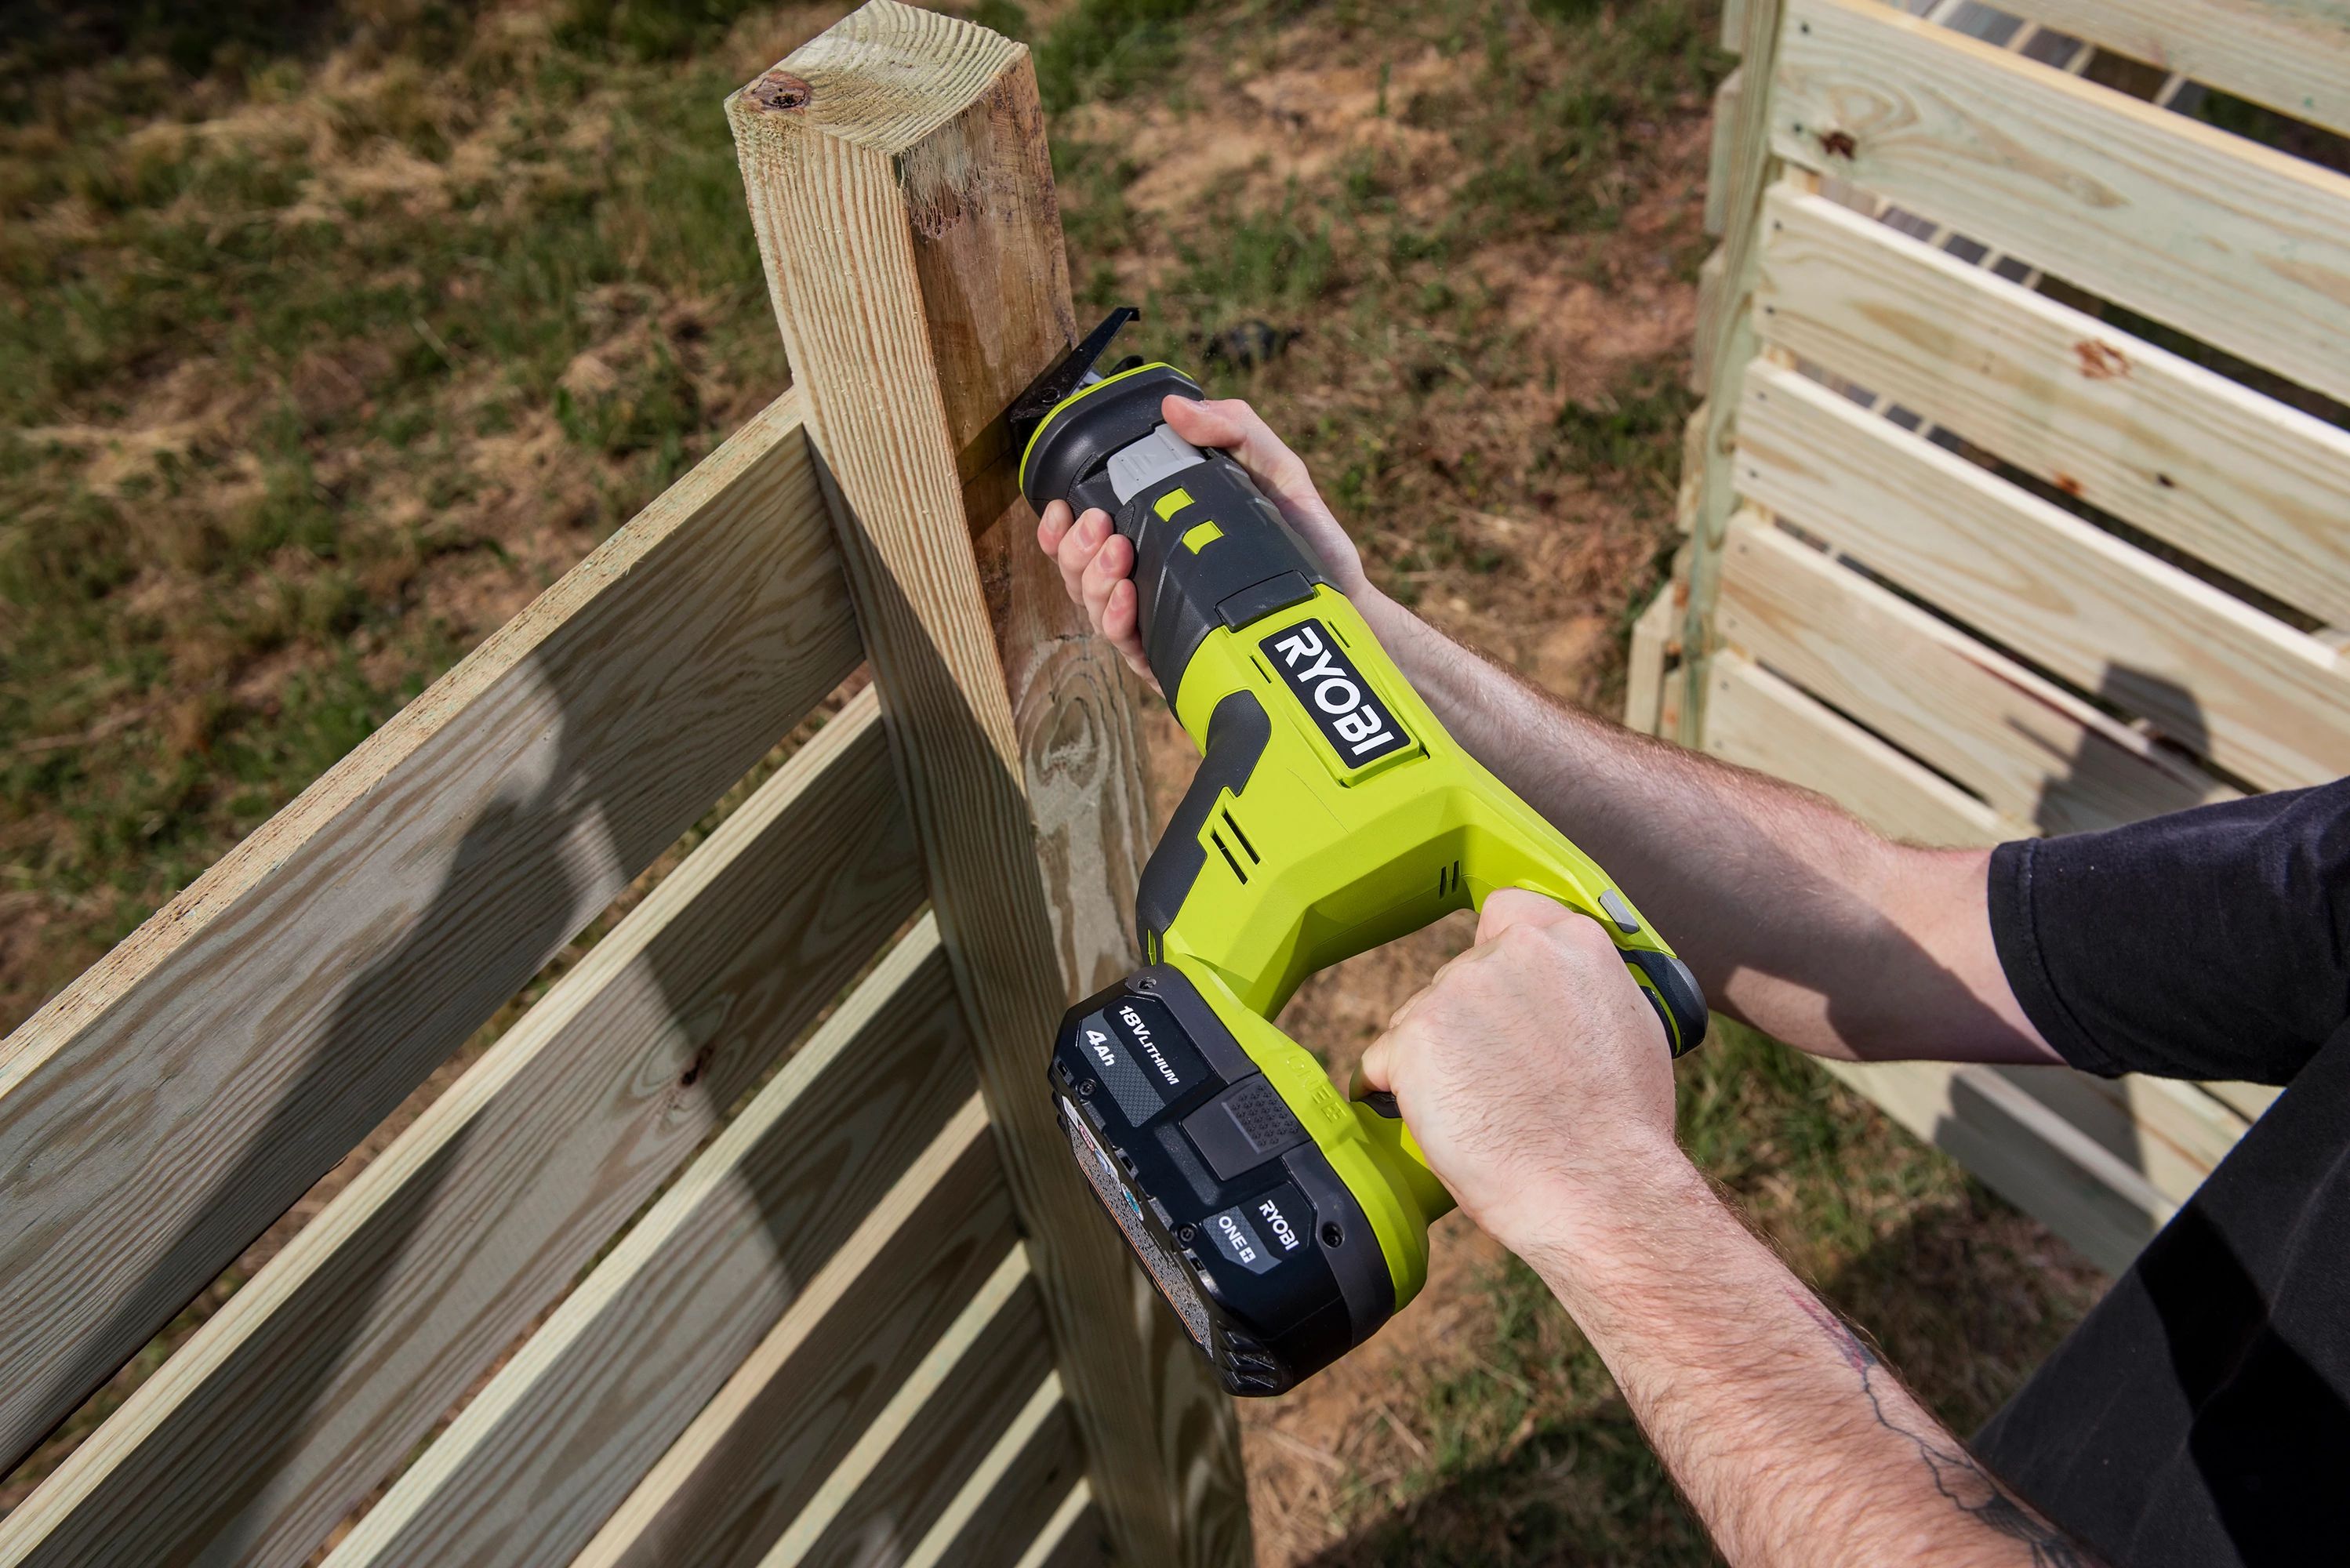 RYOBI 18-Volt Cordless Reciprocating Saw Kit with Battery and Charger  (Renewed)